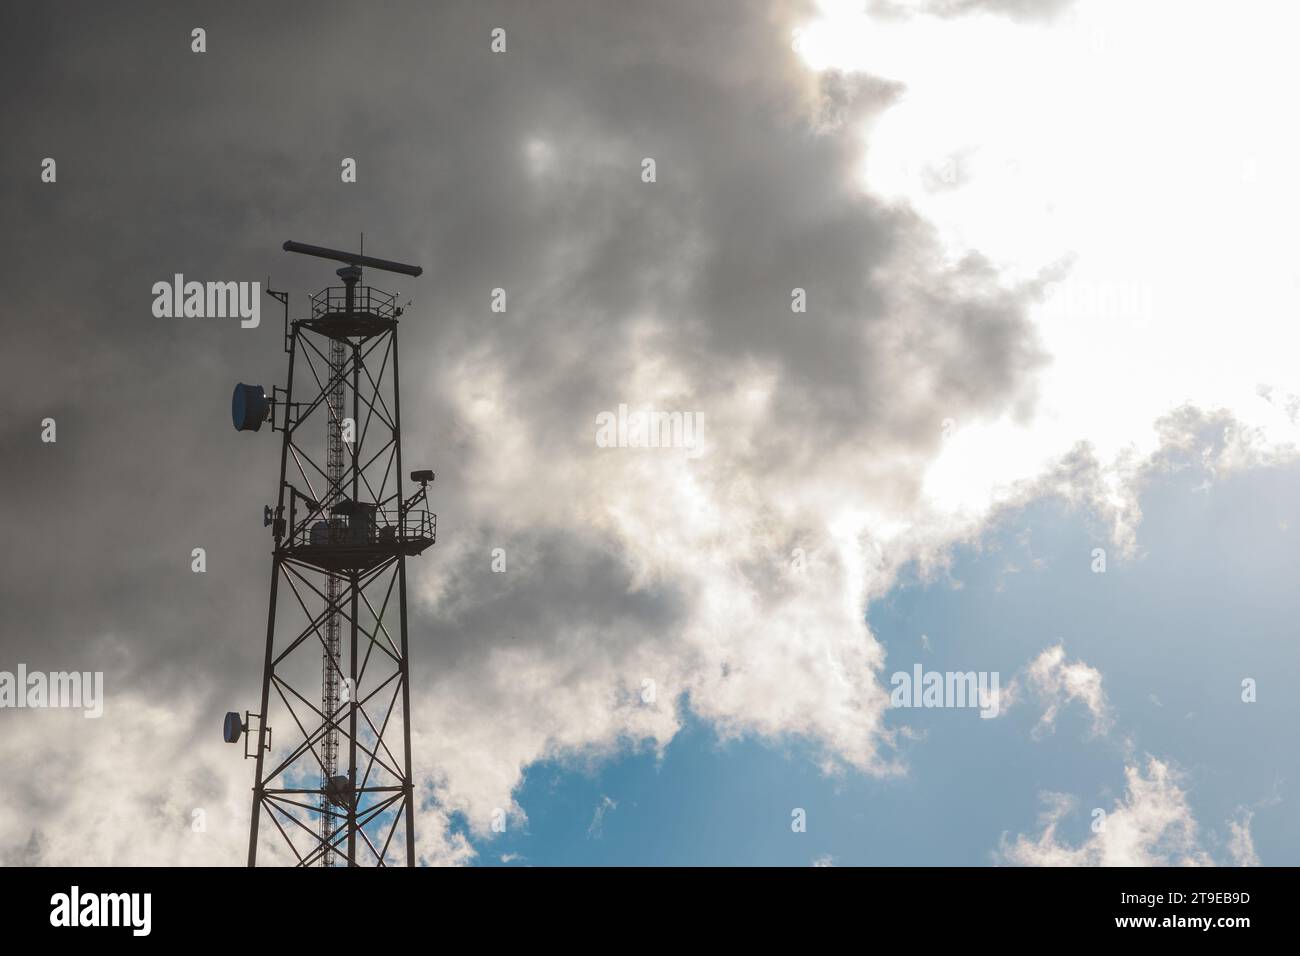 Upward shot of top of a metallic telecommunication tower on a sky background with large white cloud. Stock Photo